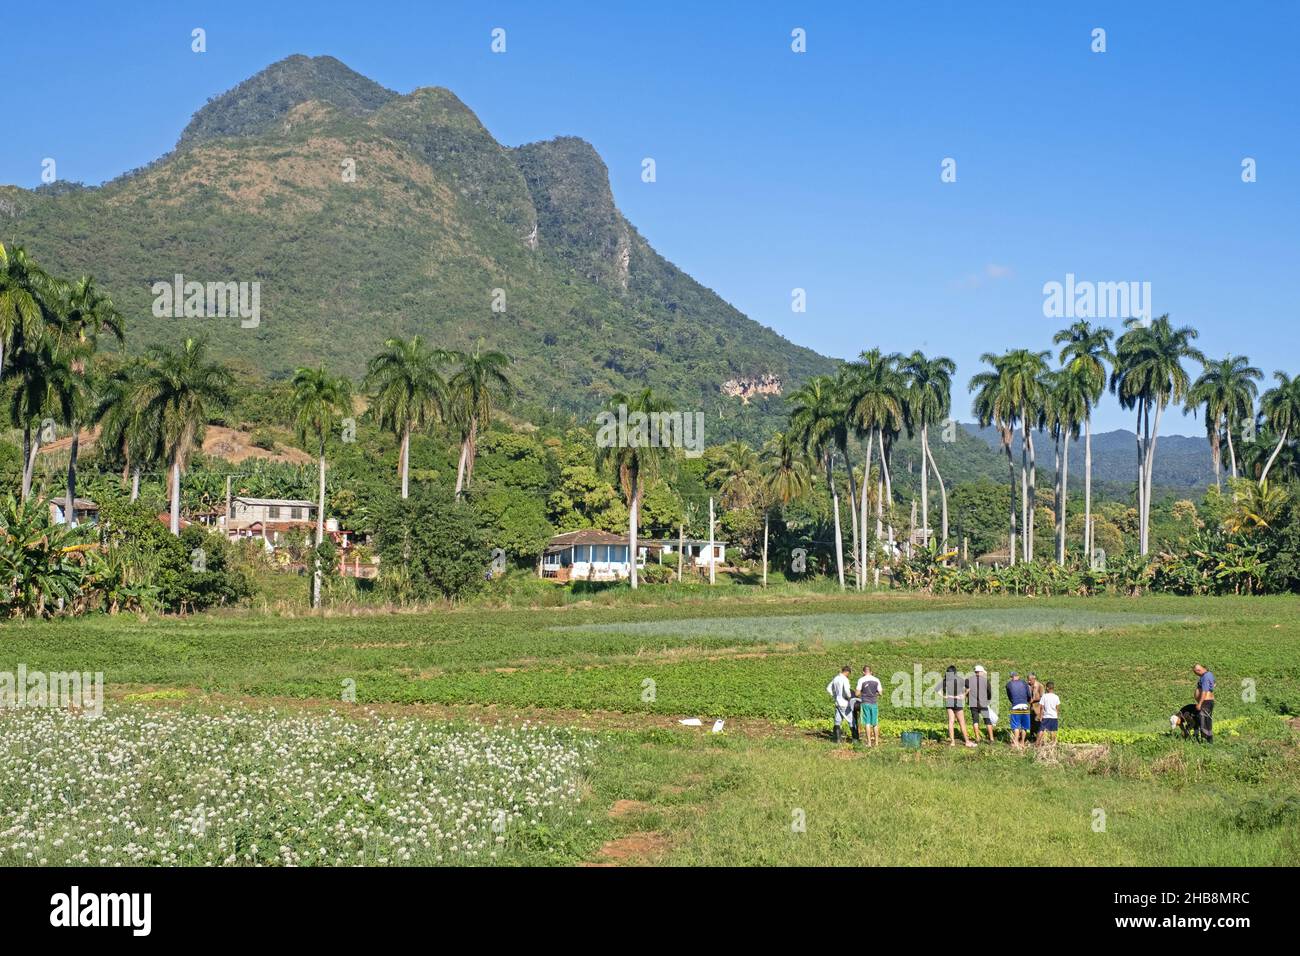 Cuban agricultural labourers working on farmland / field in the countryside along the Circuito Sur / CS, highway in the Sancti Spíritus Province, Cuba Stock Photo